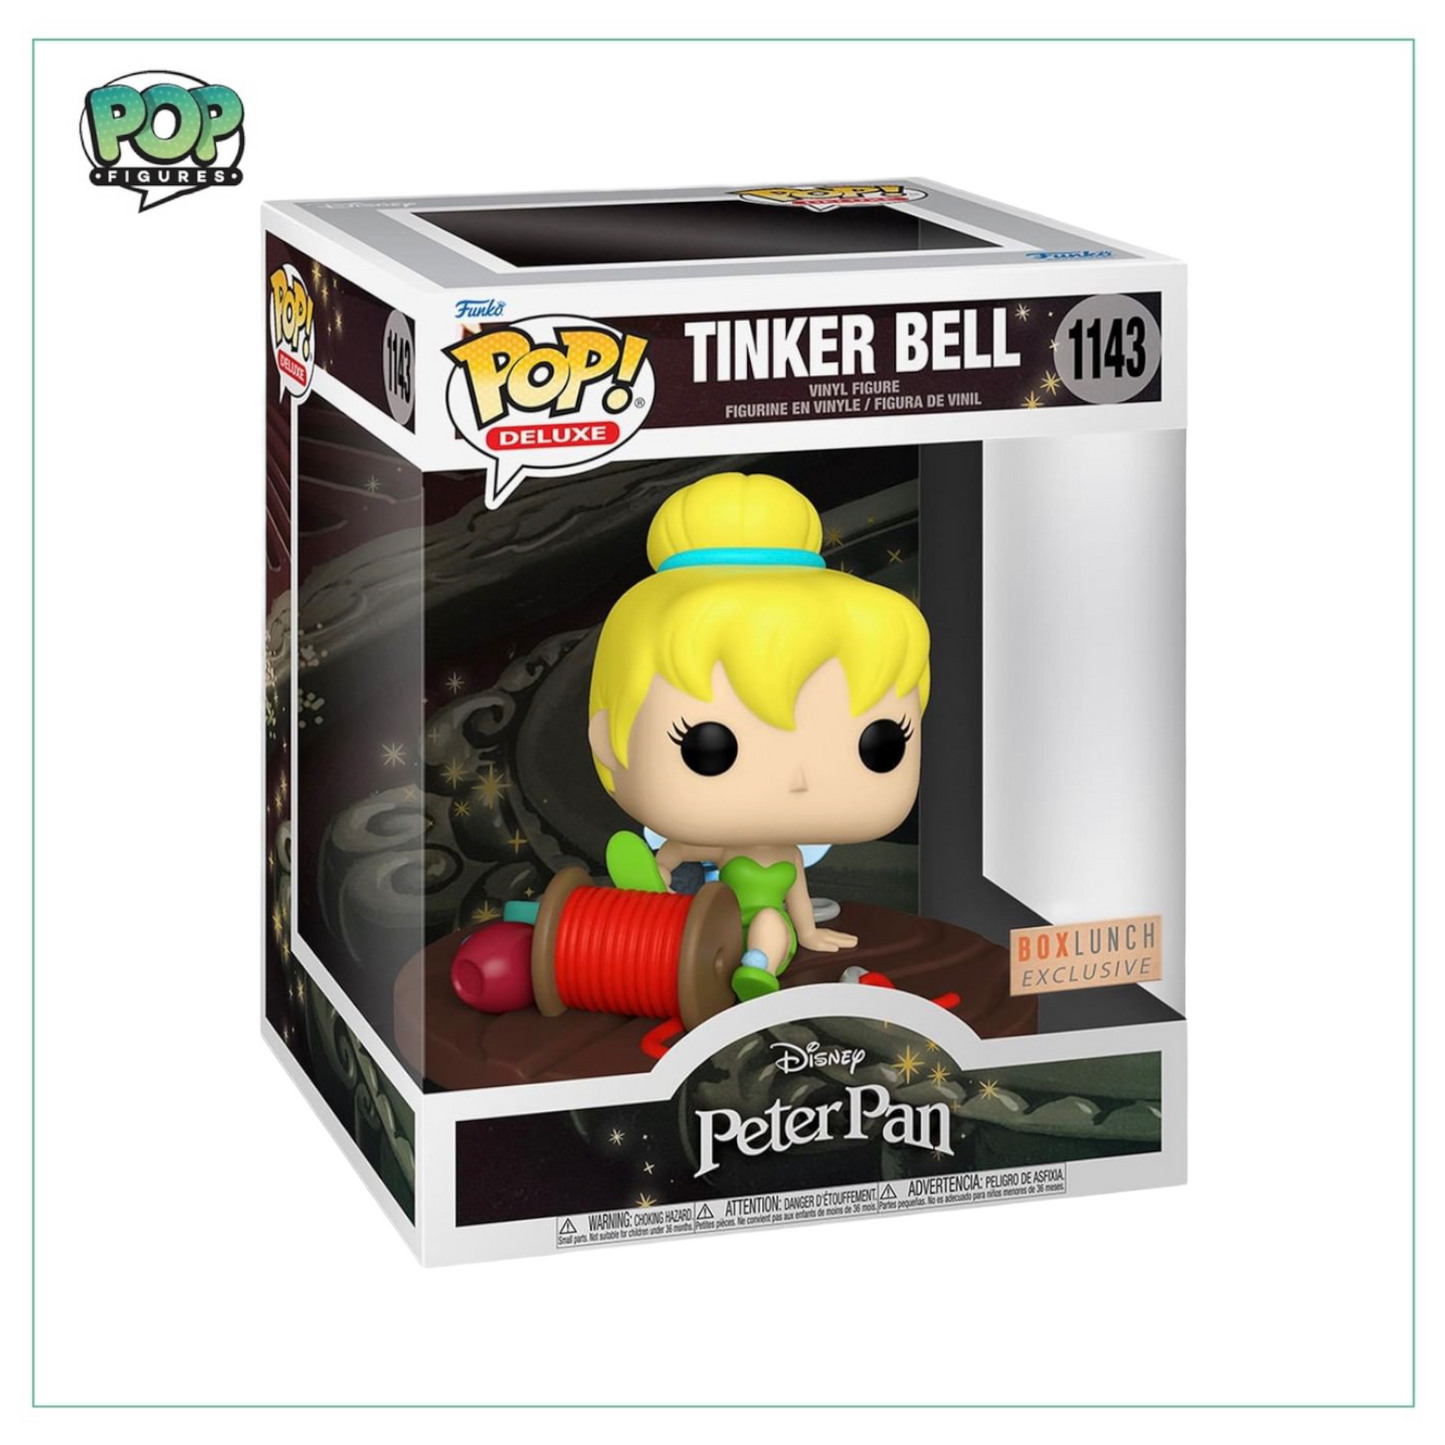 Tinker bell #1143 Deluxe Funko Pop! - Peter Pan - Box Lunch Exclusive - Angry Cat